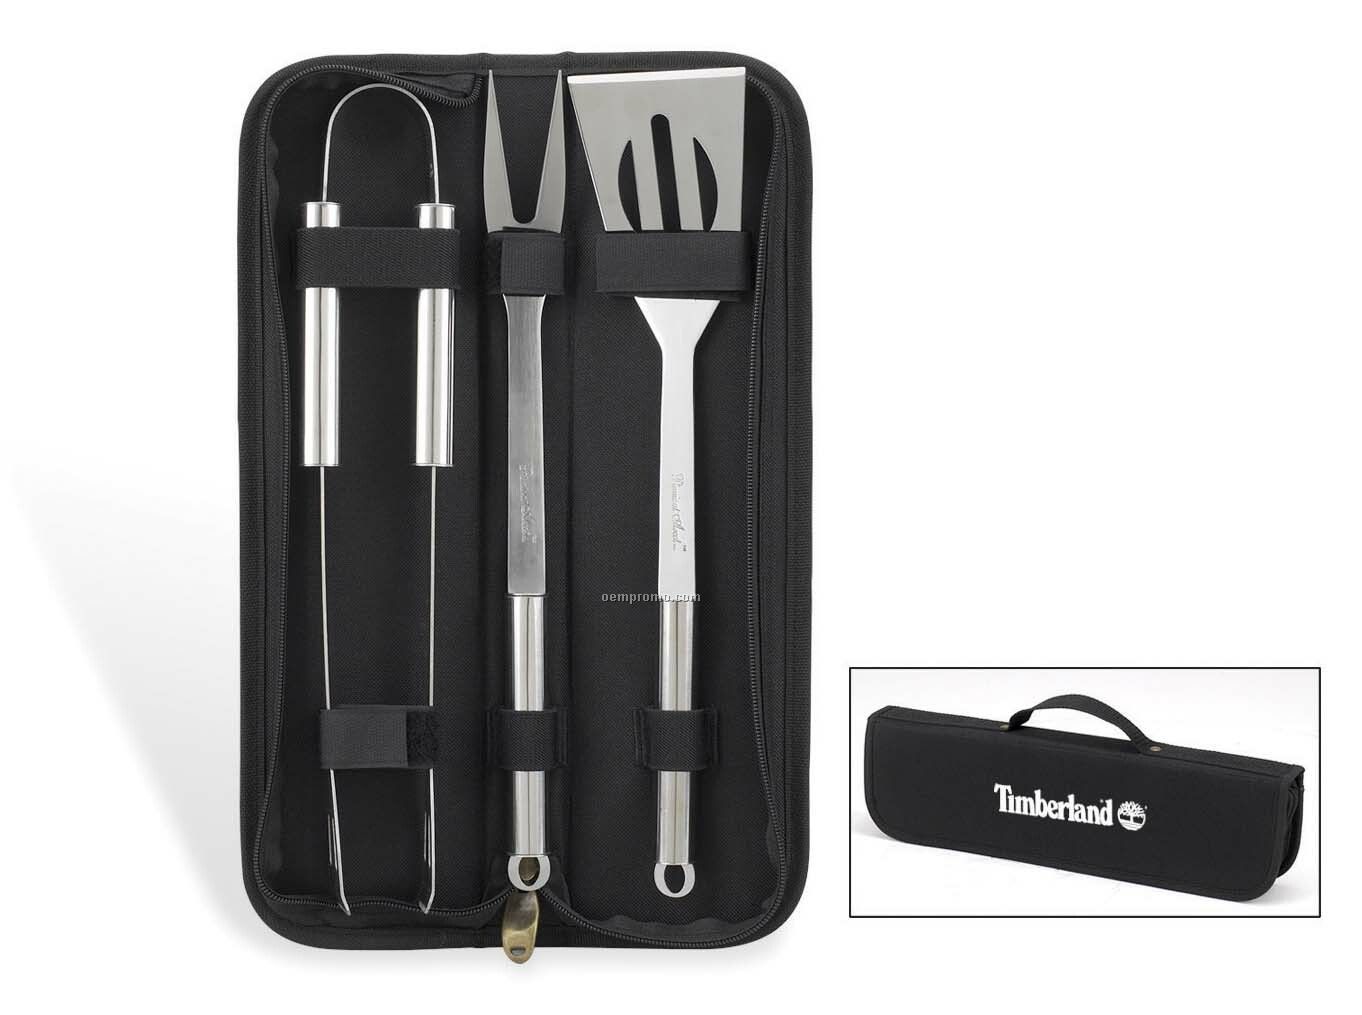 3-piece Barbecue Tool Set With Spatula, Fork & Tongs In Carry Case